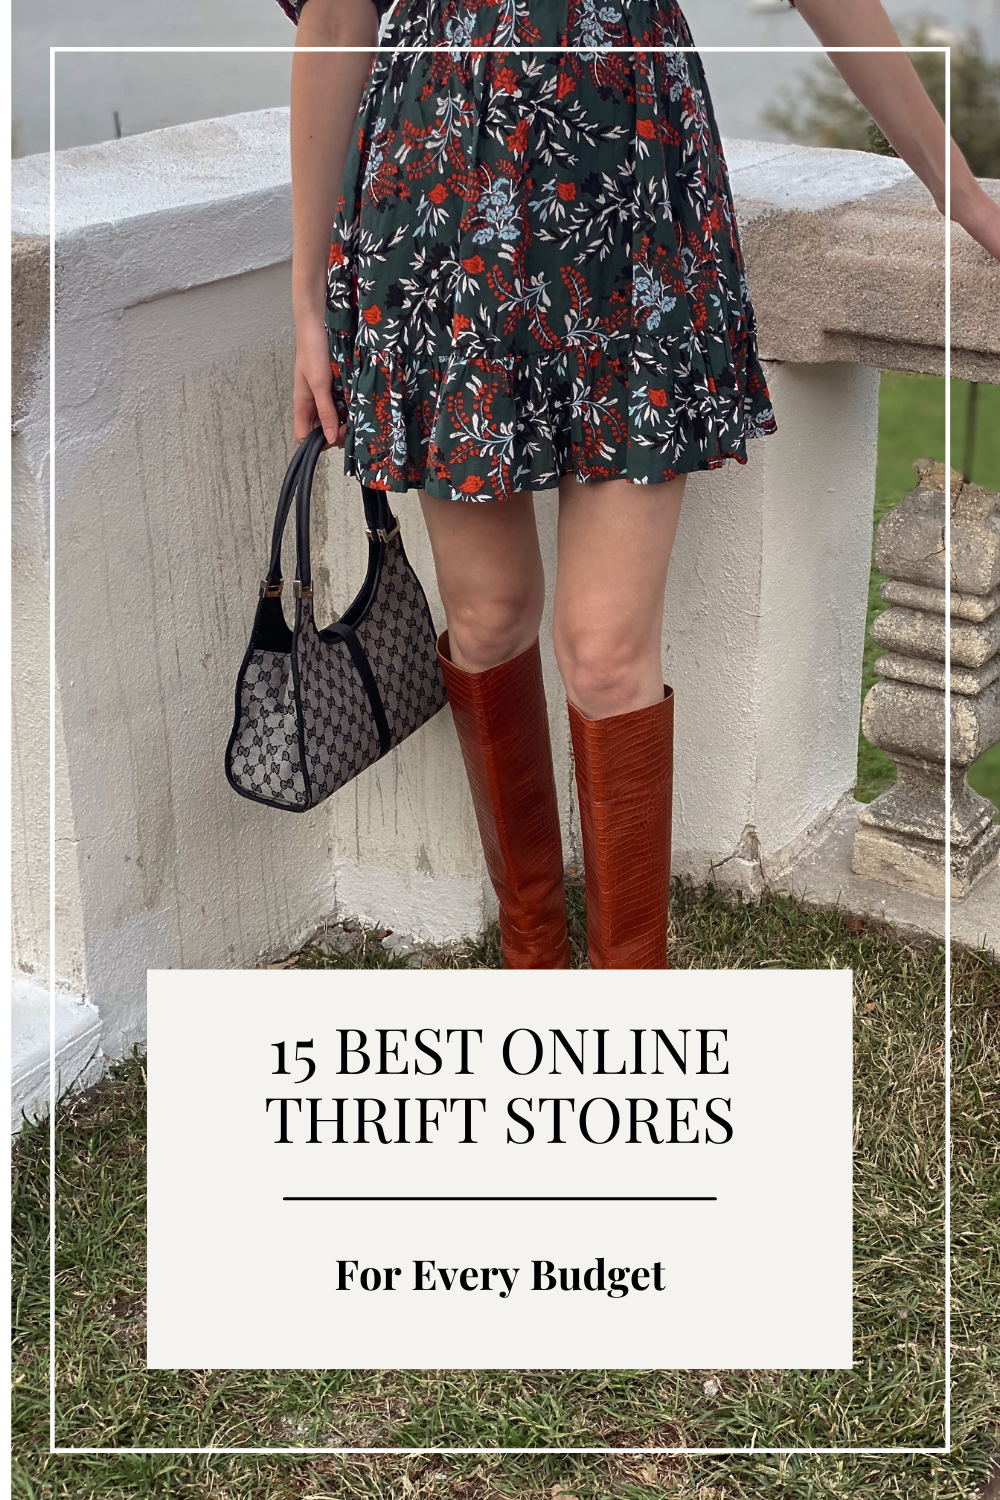 Top Online Thrift Stores for Budget or Luxury Secondhand Clothing